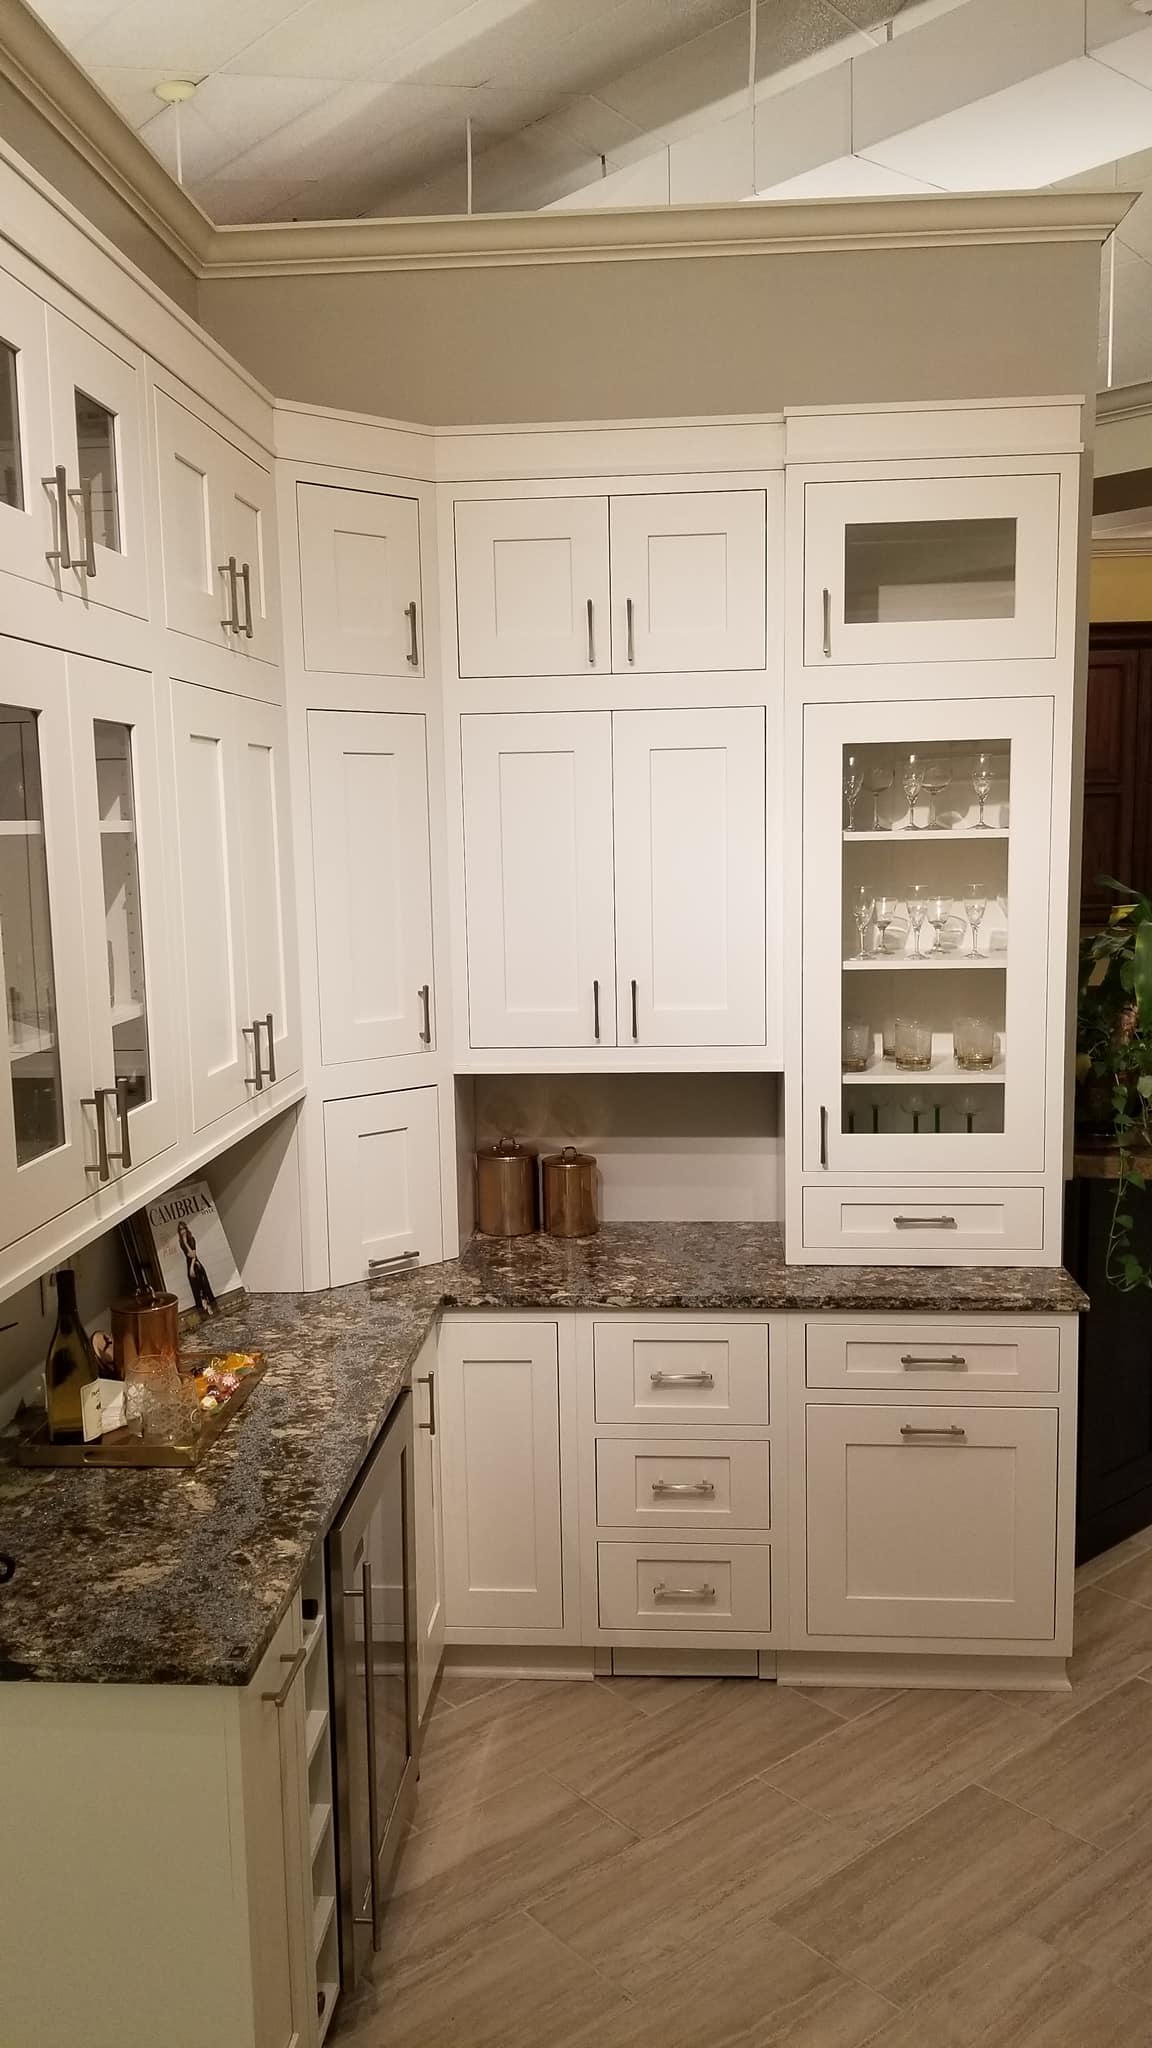 showroom cabinets display of glass front and white cabinets, wine cooler, granite countertop | Marchand Creative Kitchens Cabinets New Orleans Metairie Mandeville LA